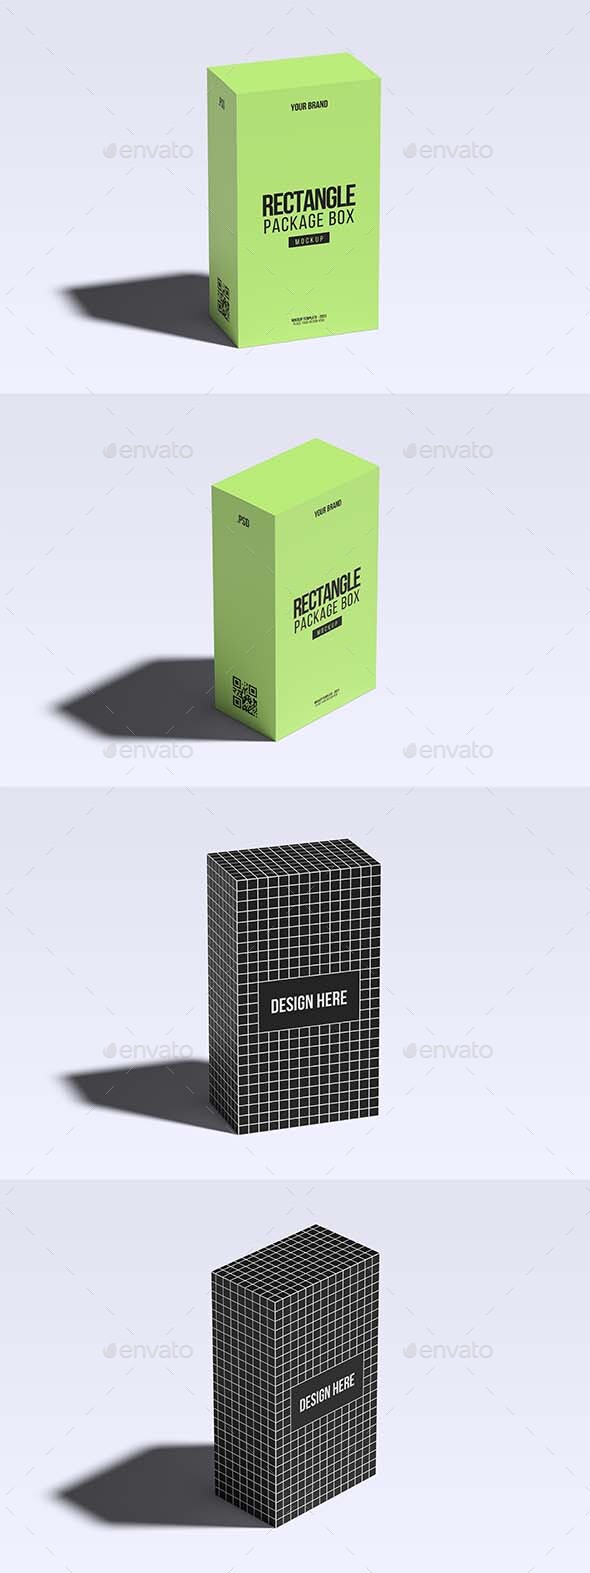 [DOWNLOAD]Vertical Rectangle Package Box Mockup